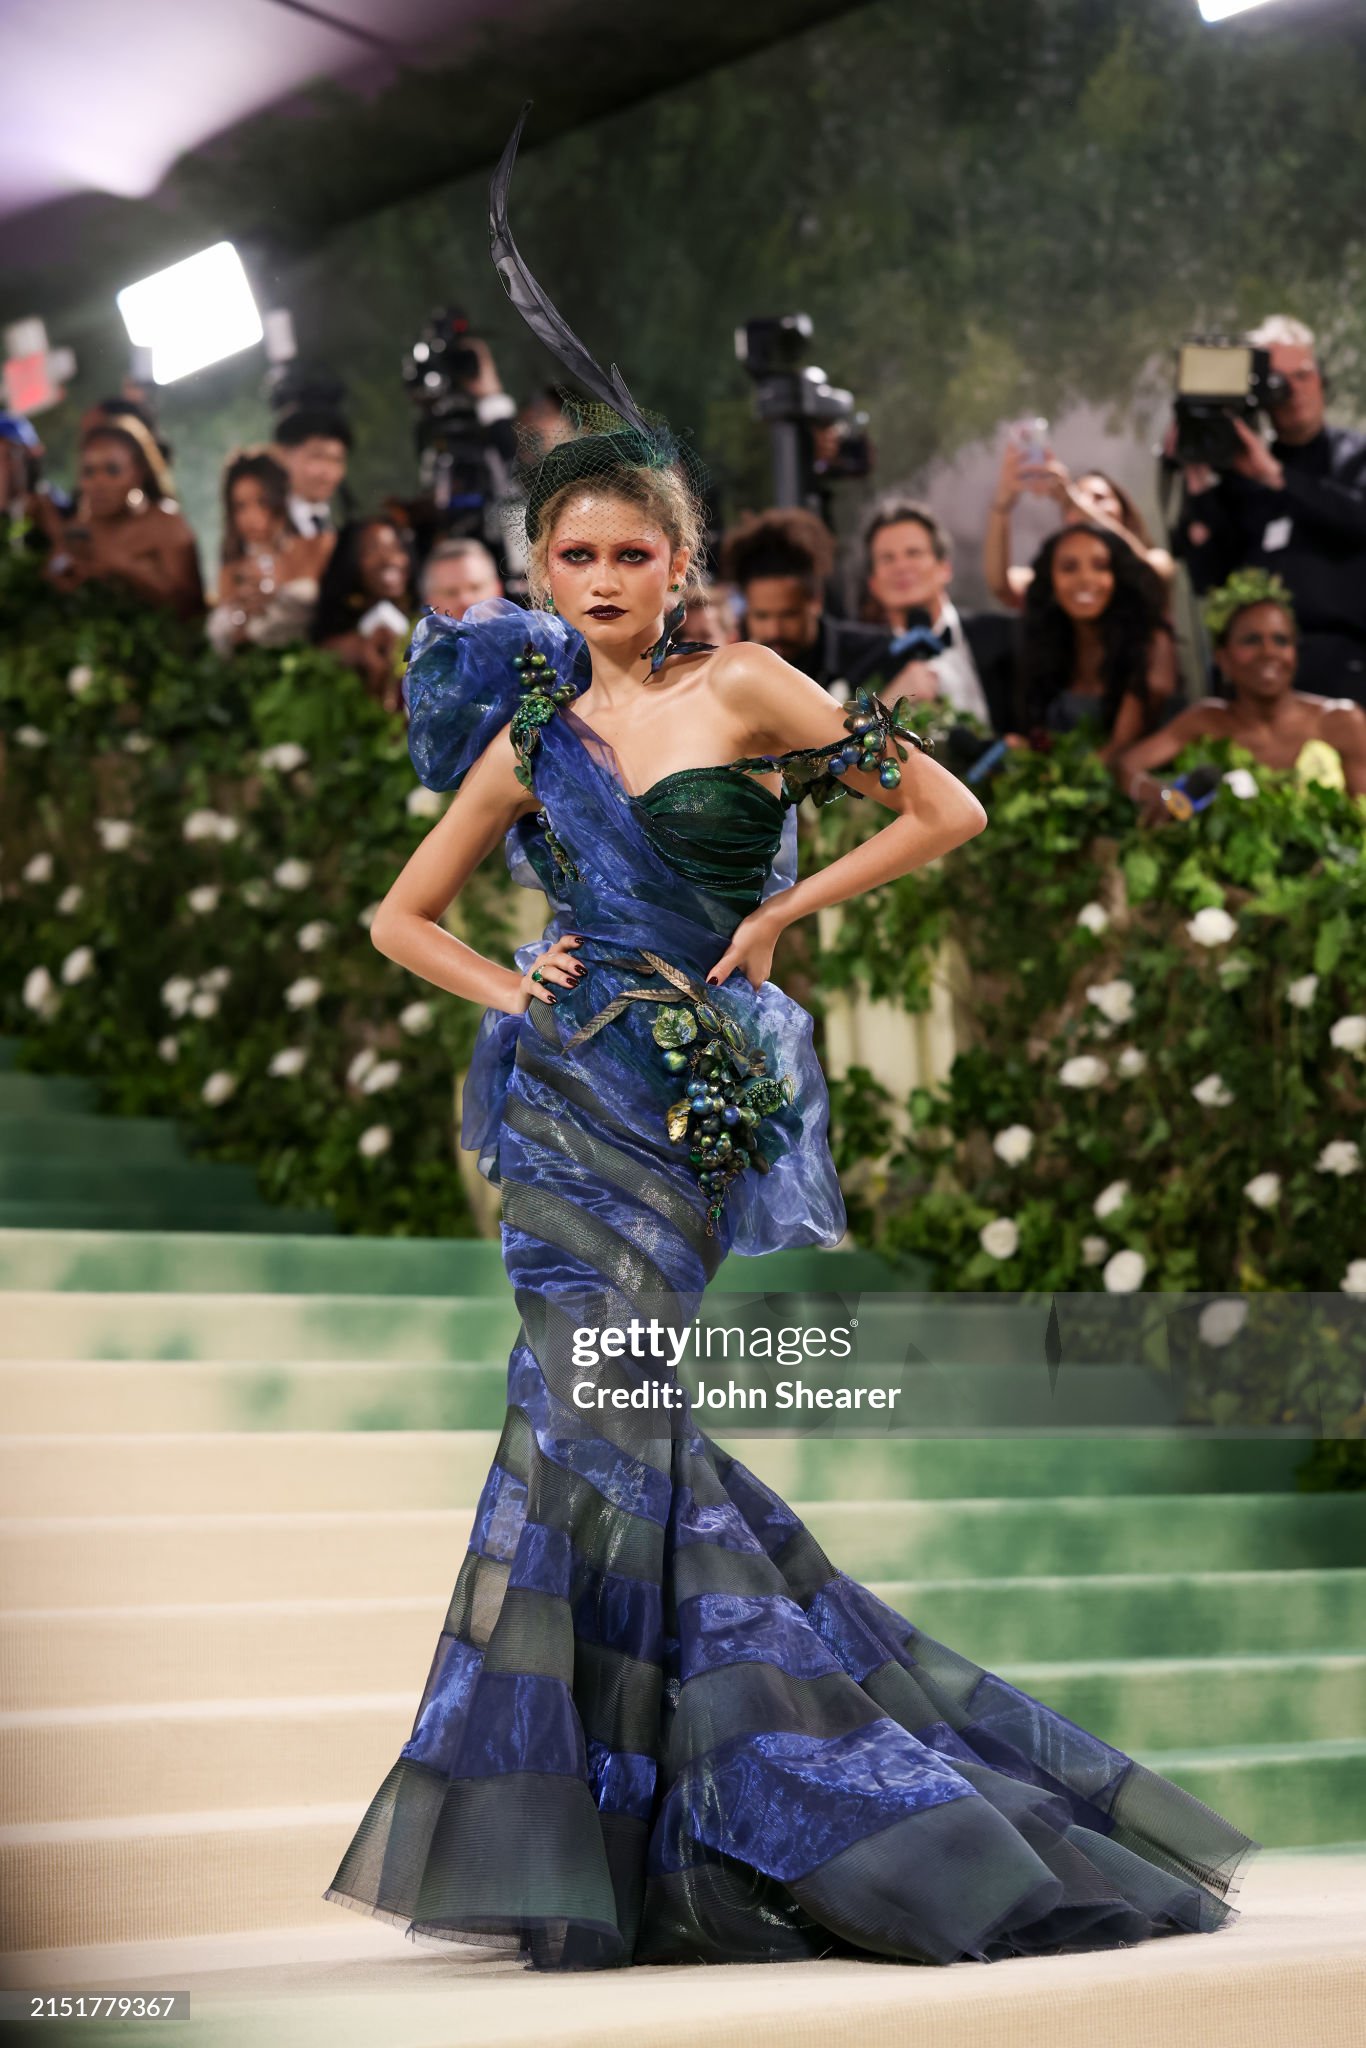 gettyimages-2151779367-2048x2048.jpg